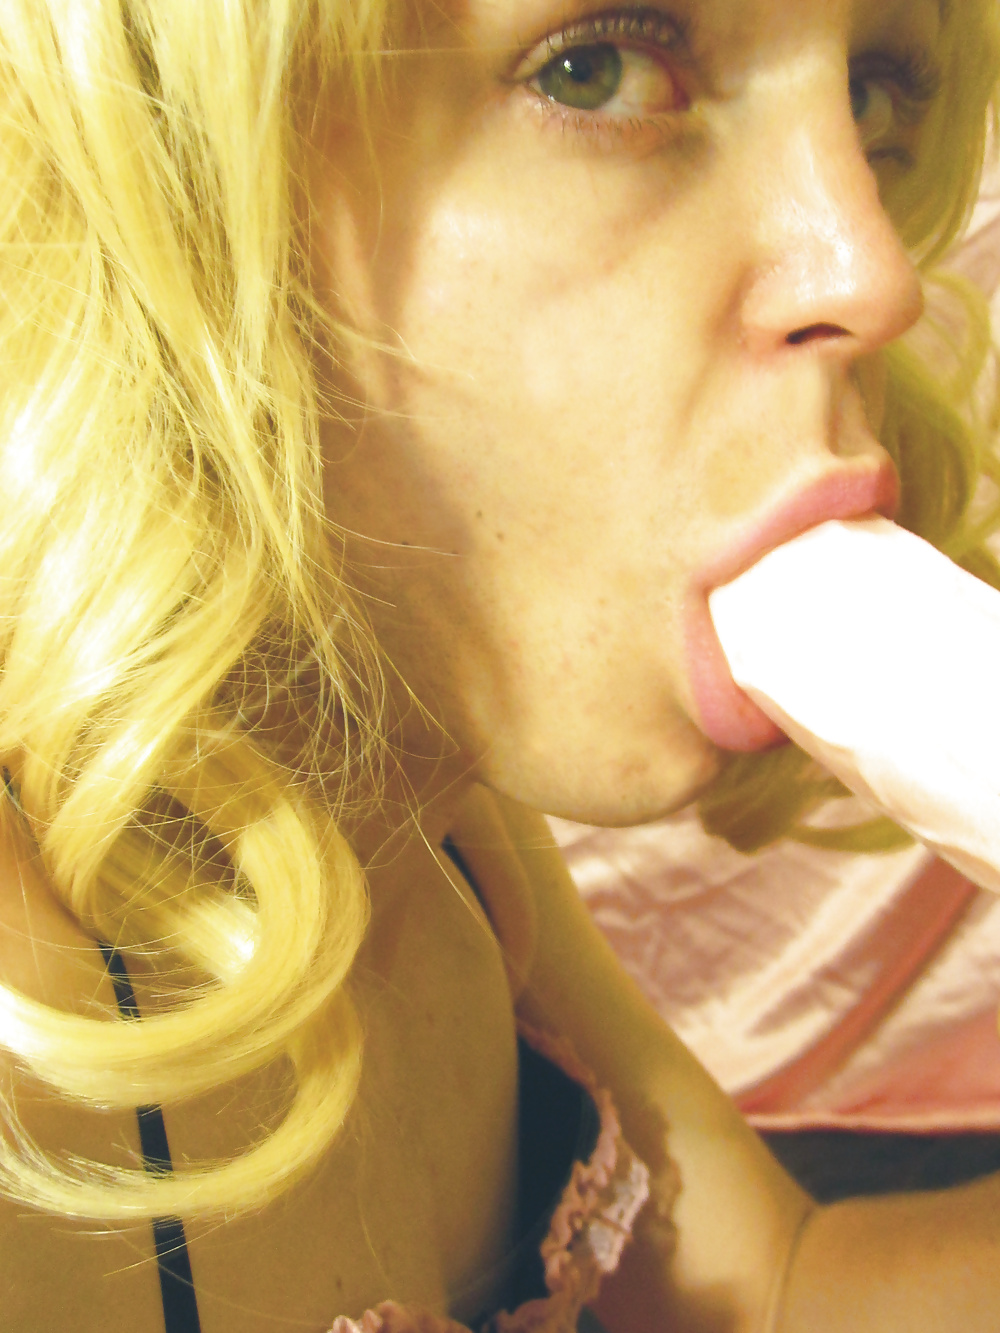 New sissy pics ! blonde pigtails and cocksucking (: #29783917